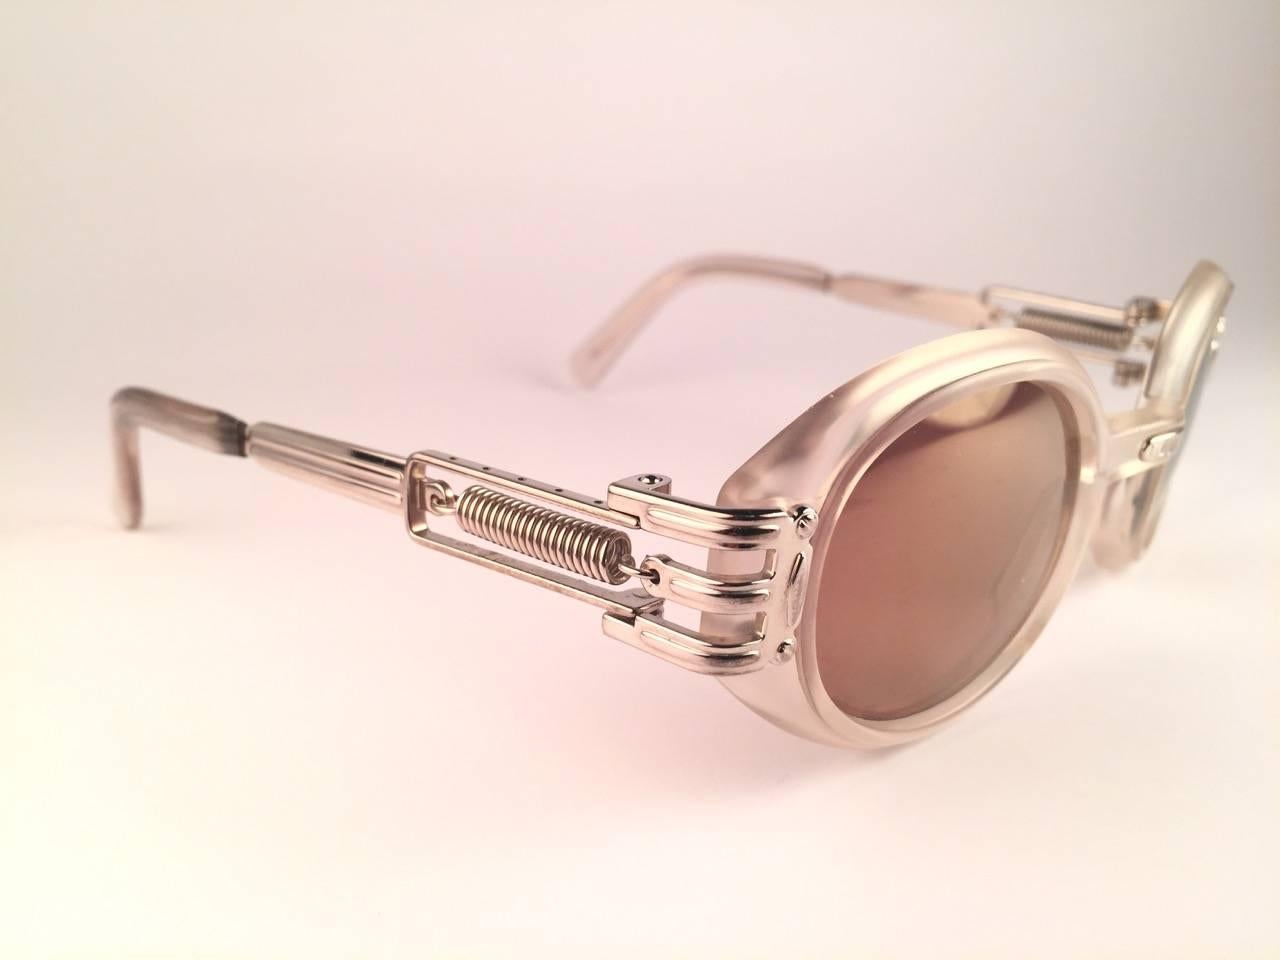 New Jean Paul Gaultier 56 5203 Translucent & Silver frame. 
Spotless Amber Mirror lenses that complete a ready to wear JPG look.

Amazing design with strong yet intricate details.
Design and produced in the 1900's.
New, never worn or displayed.
A